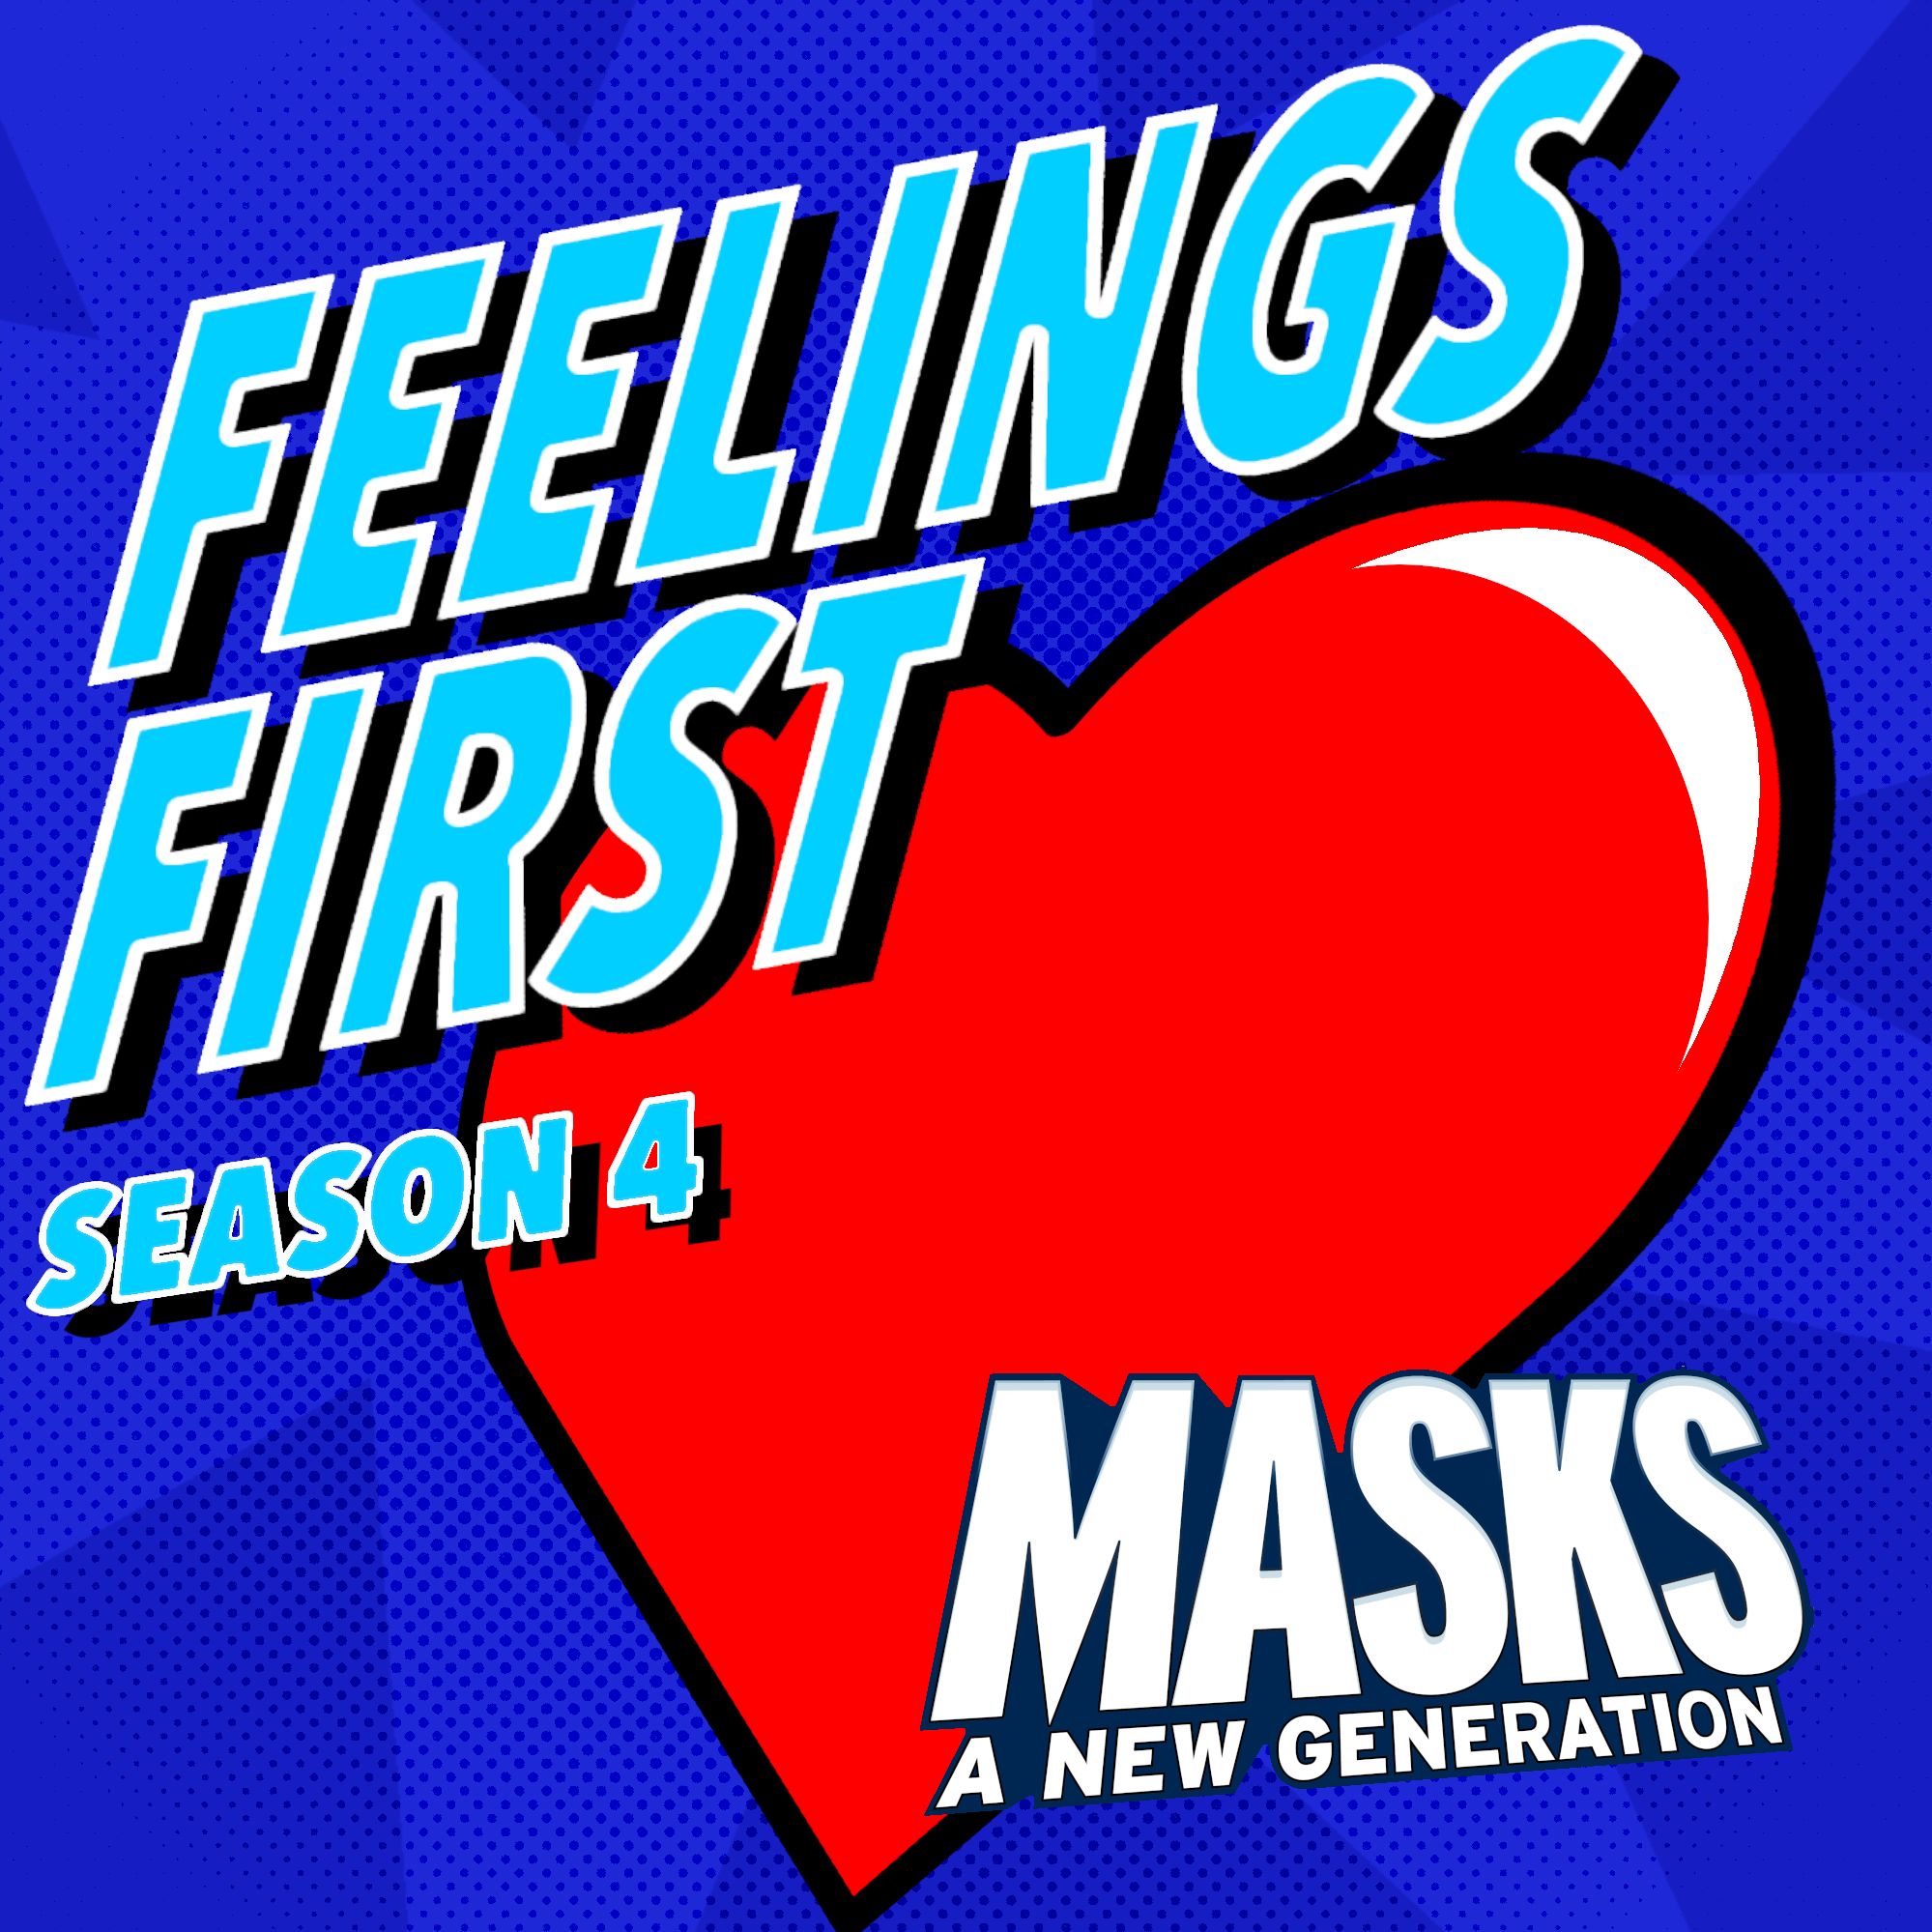 Feelings First Podcast